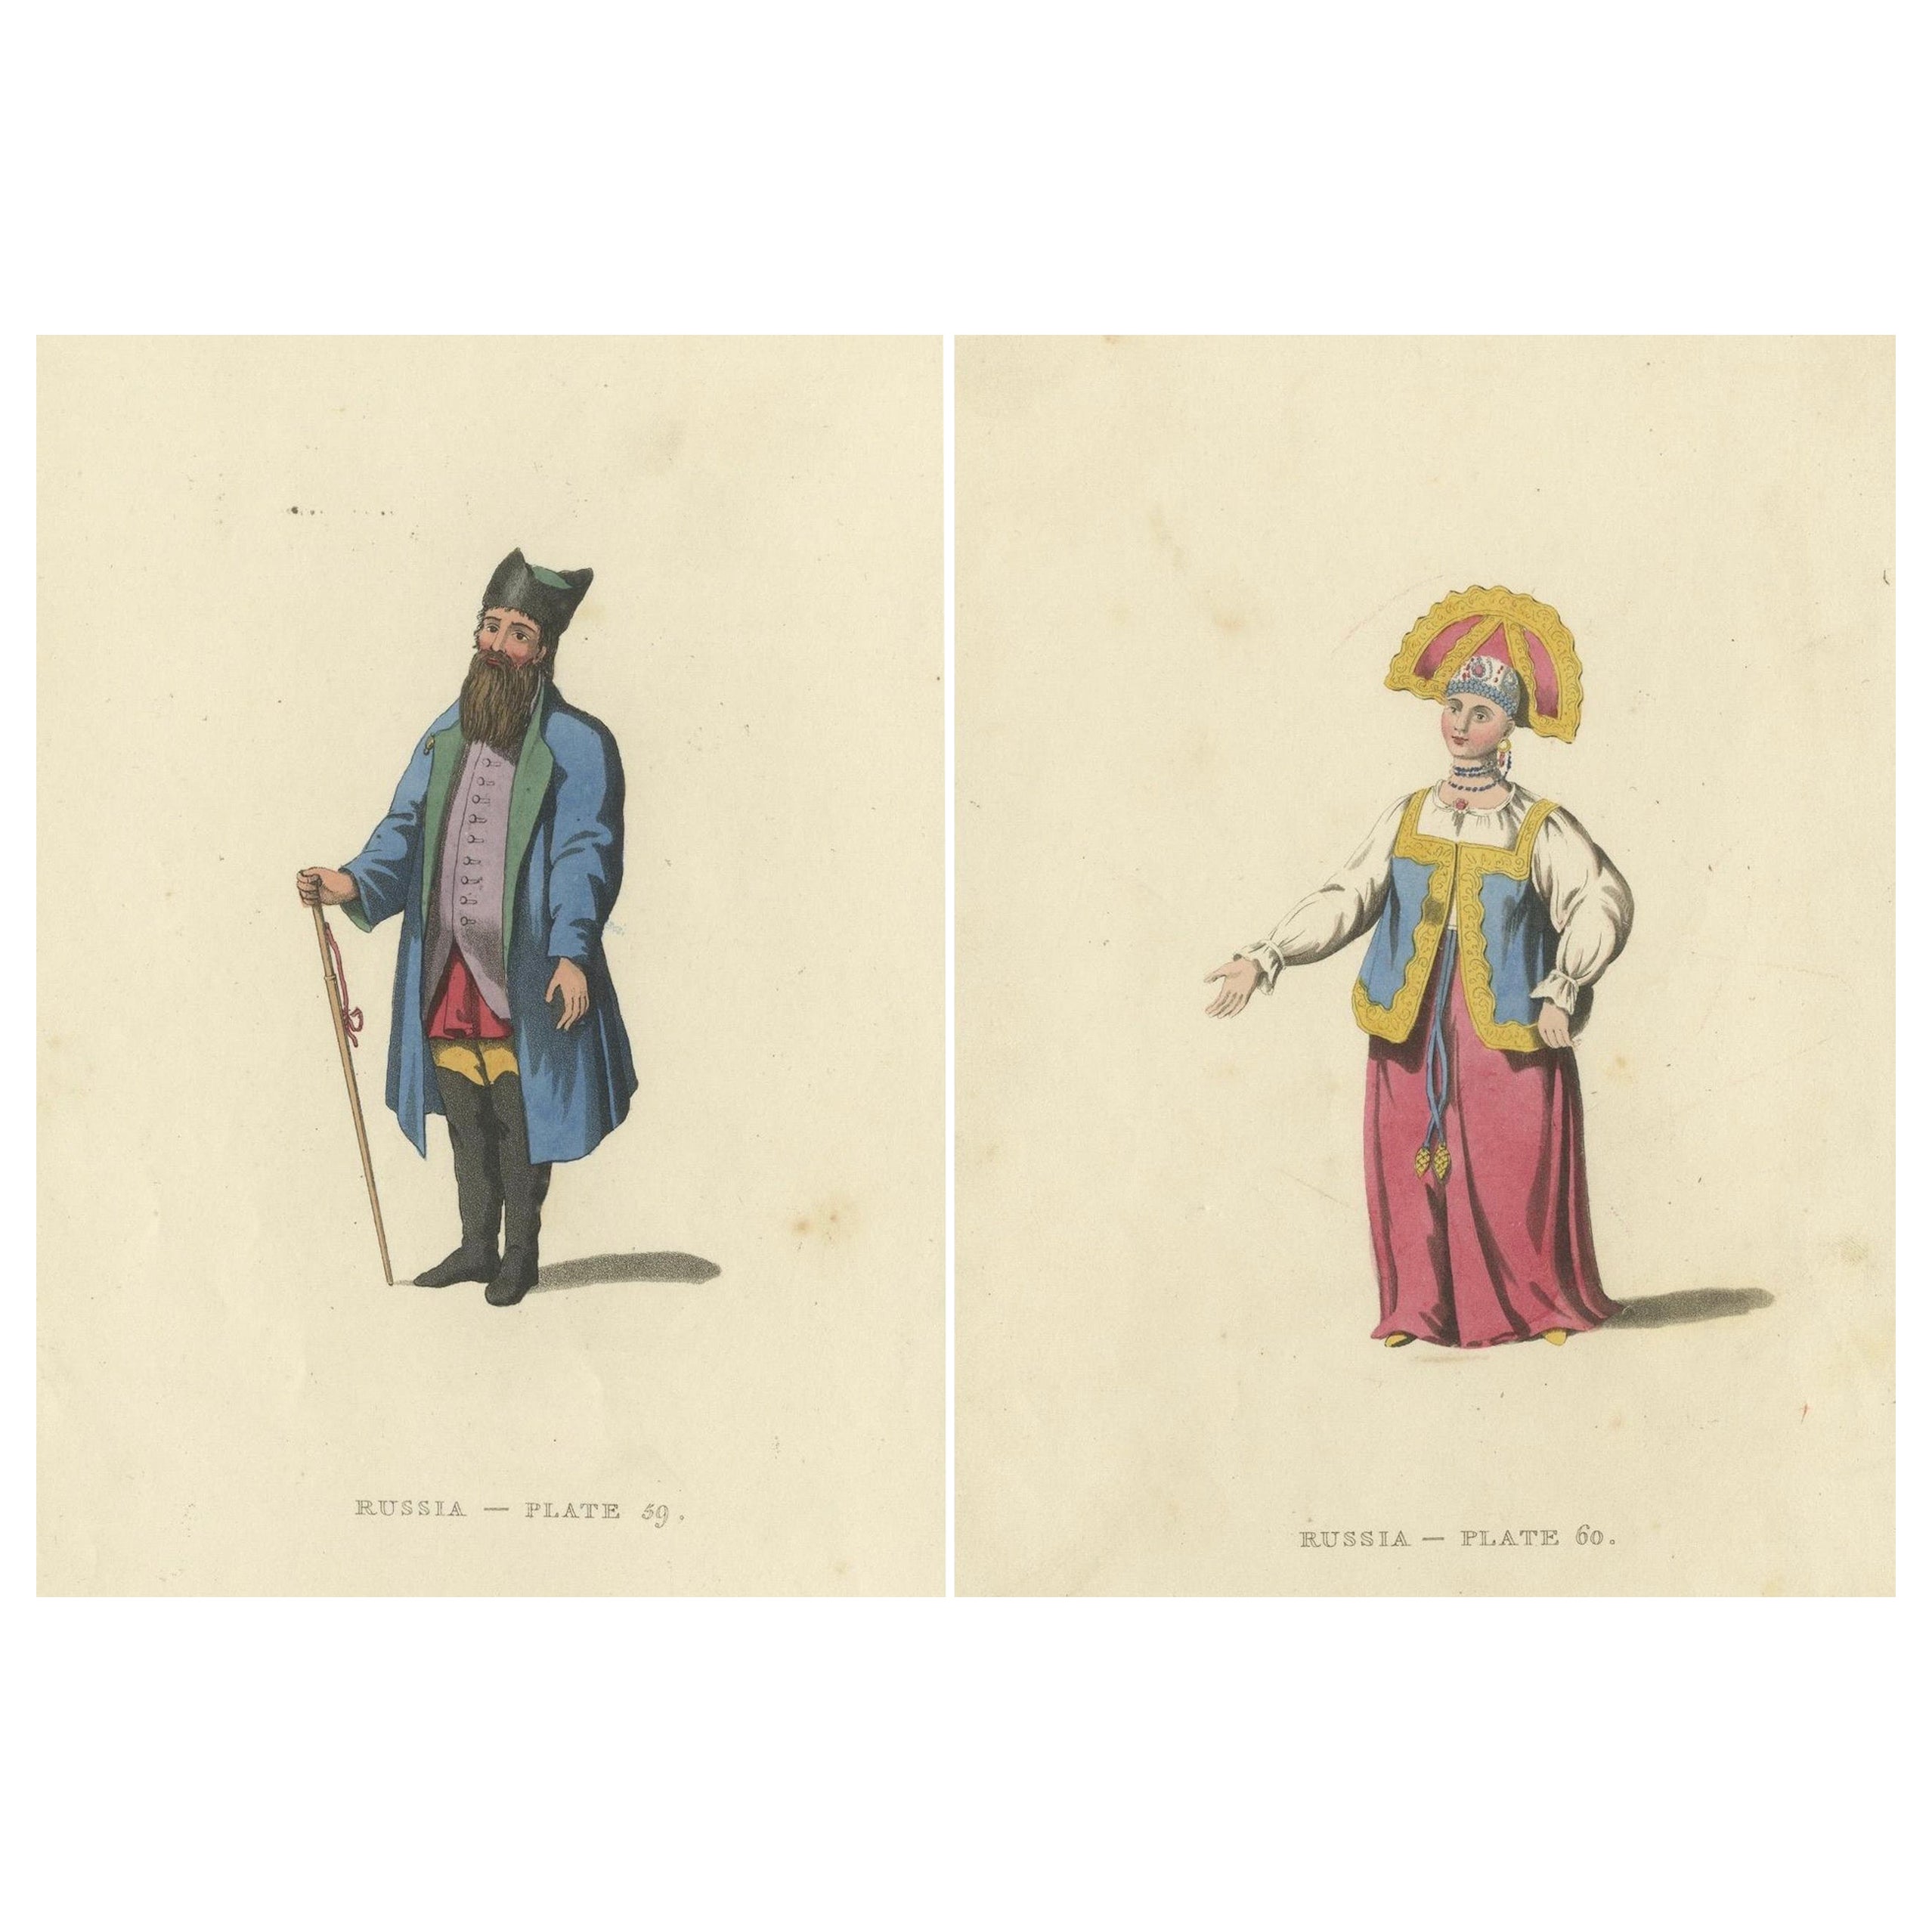 Sartorial Elegance of Kaluga: A Merchant and a Woman in Traditional Attire, 1814 For Sale